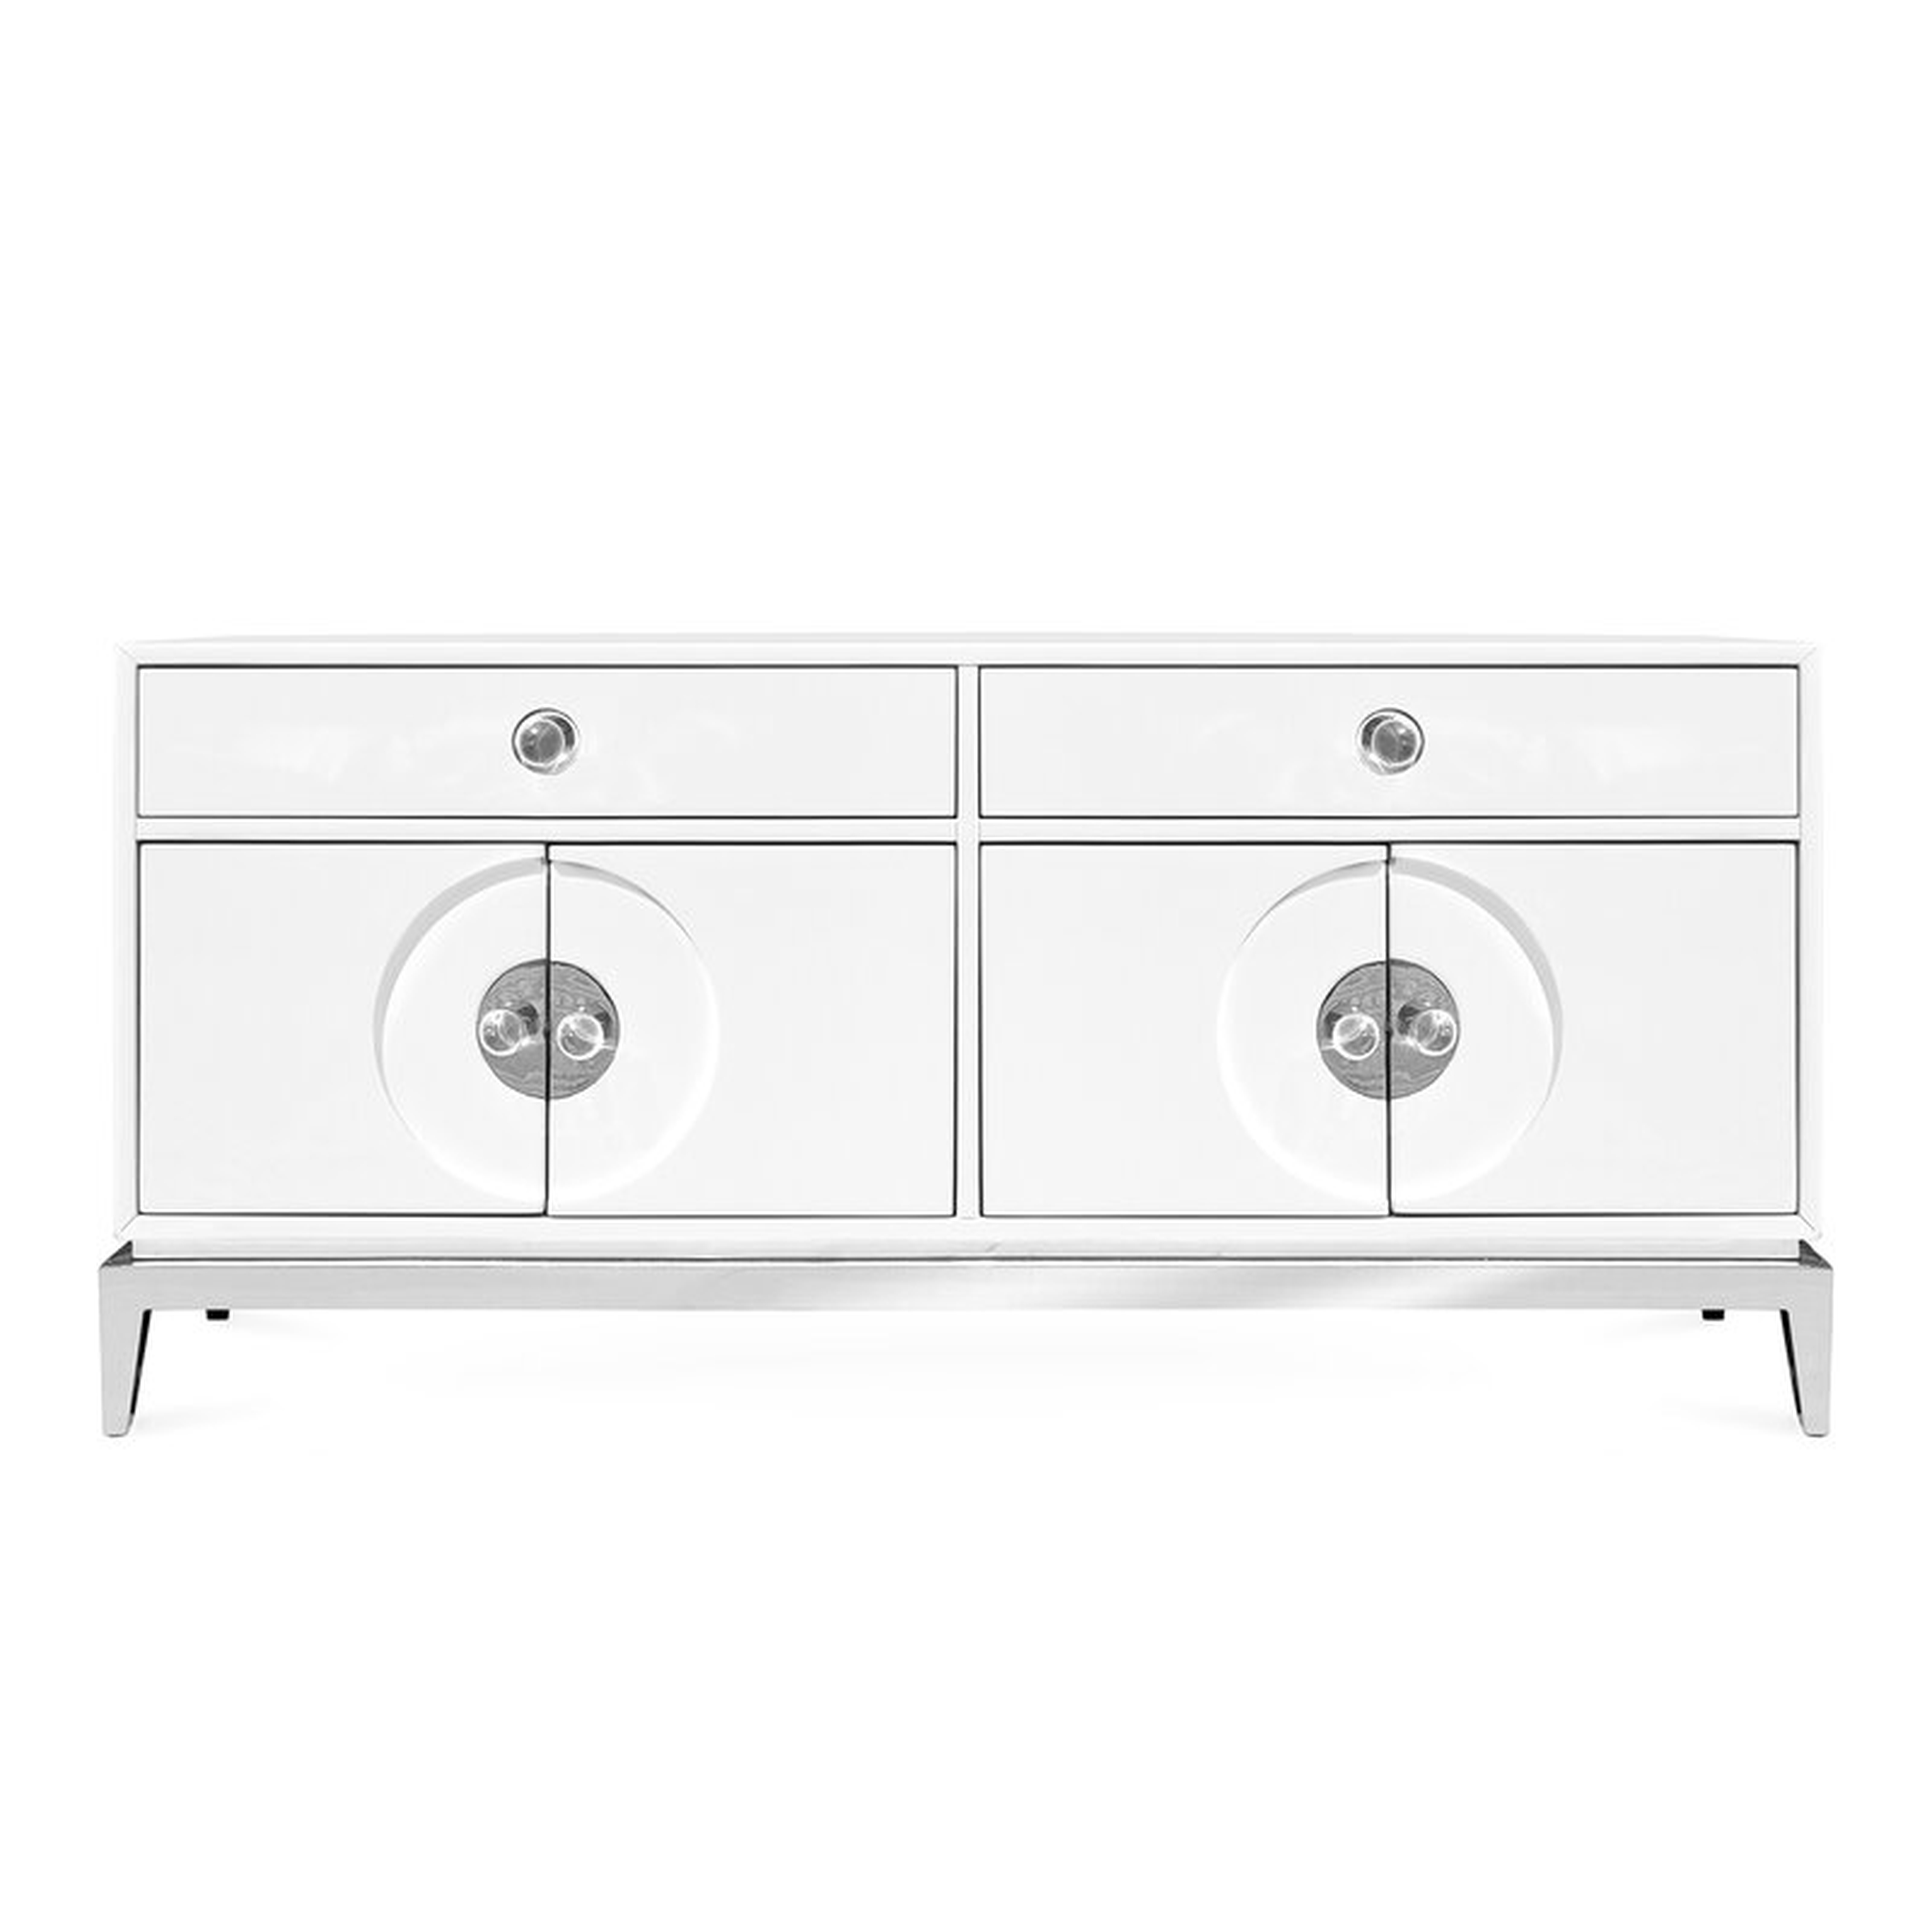 Jonathan Adler Channing TV Stand for TVs up to 65 inches - Perigold